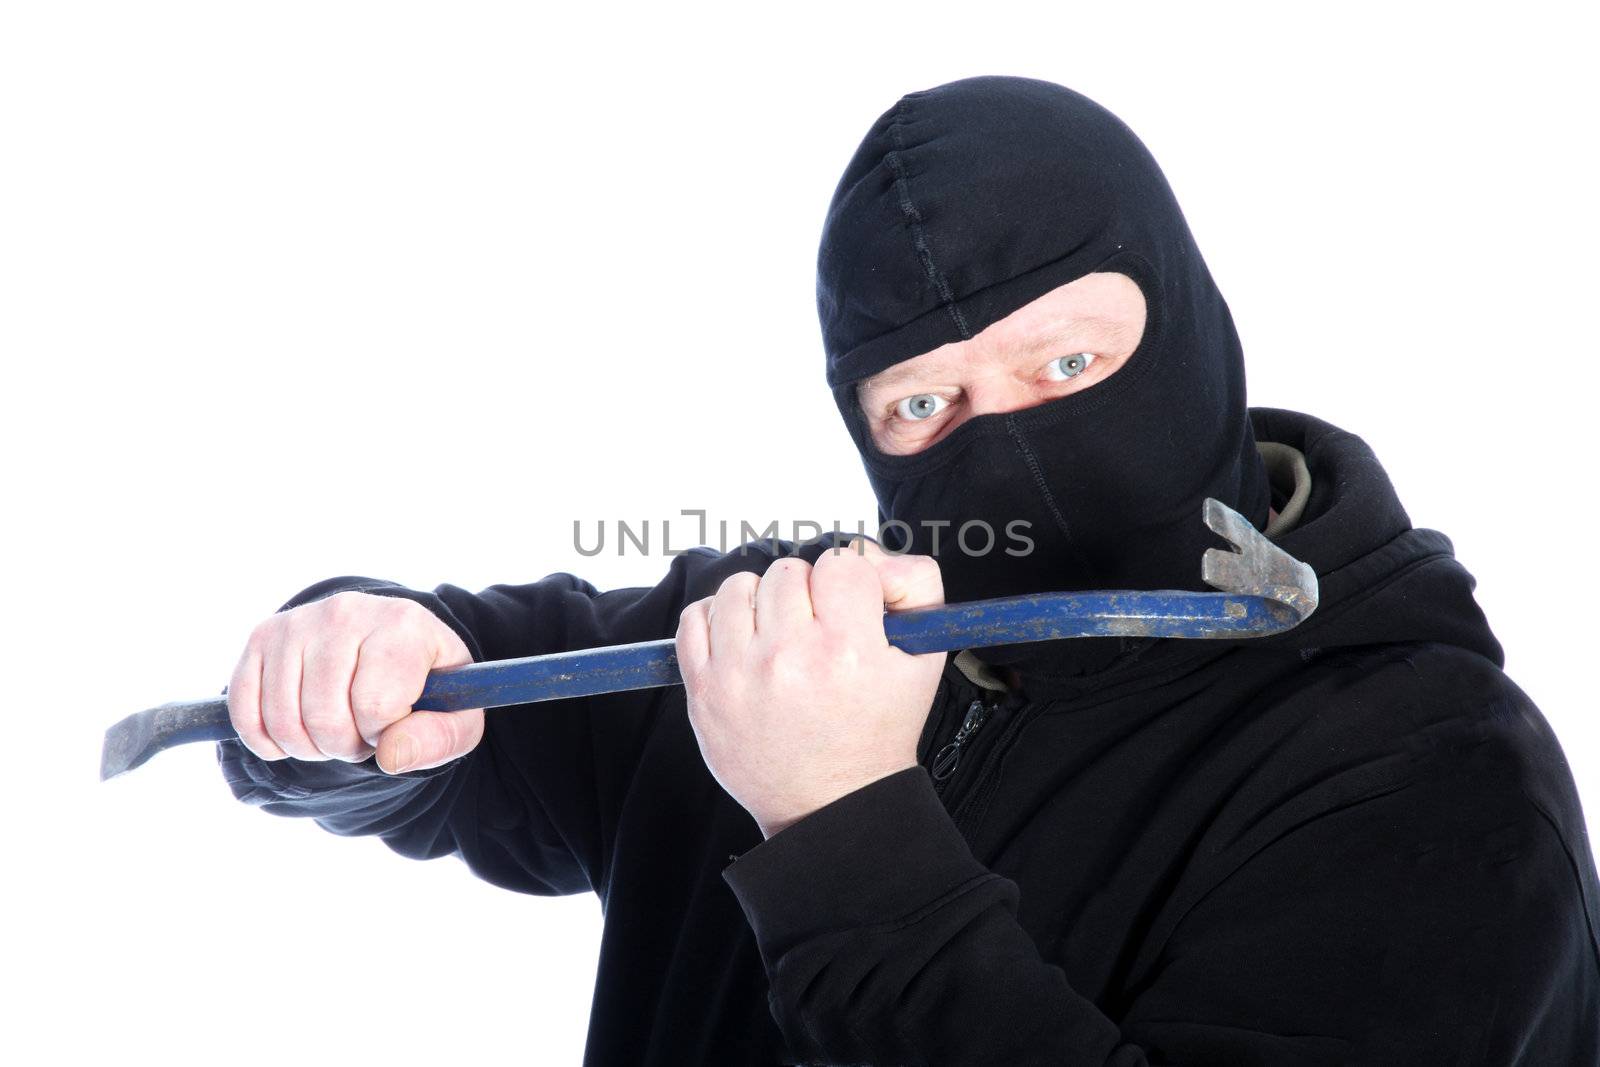 Masked male robber in a black balaclava wielding a crowbar in front of him in a threatening manner isolated on white